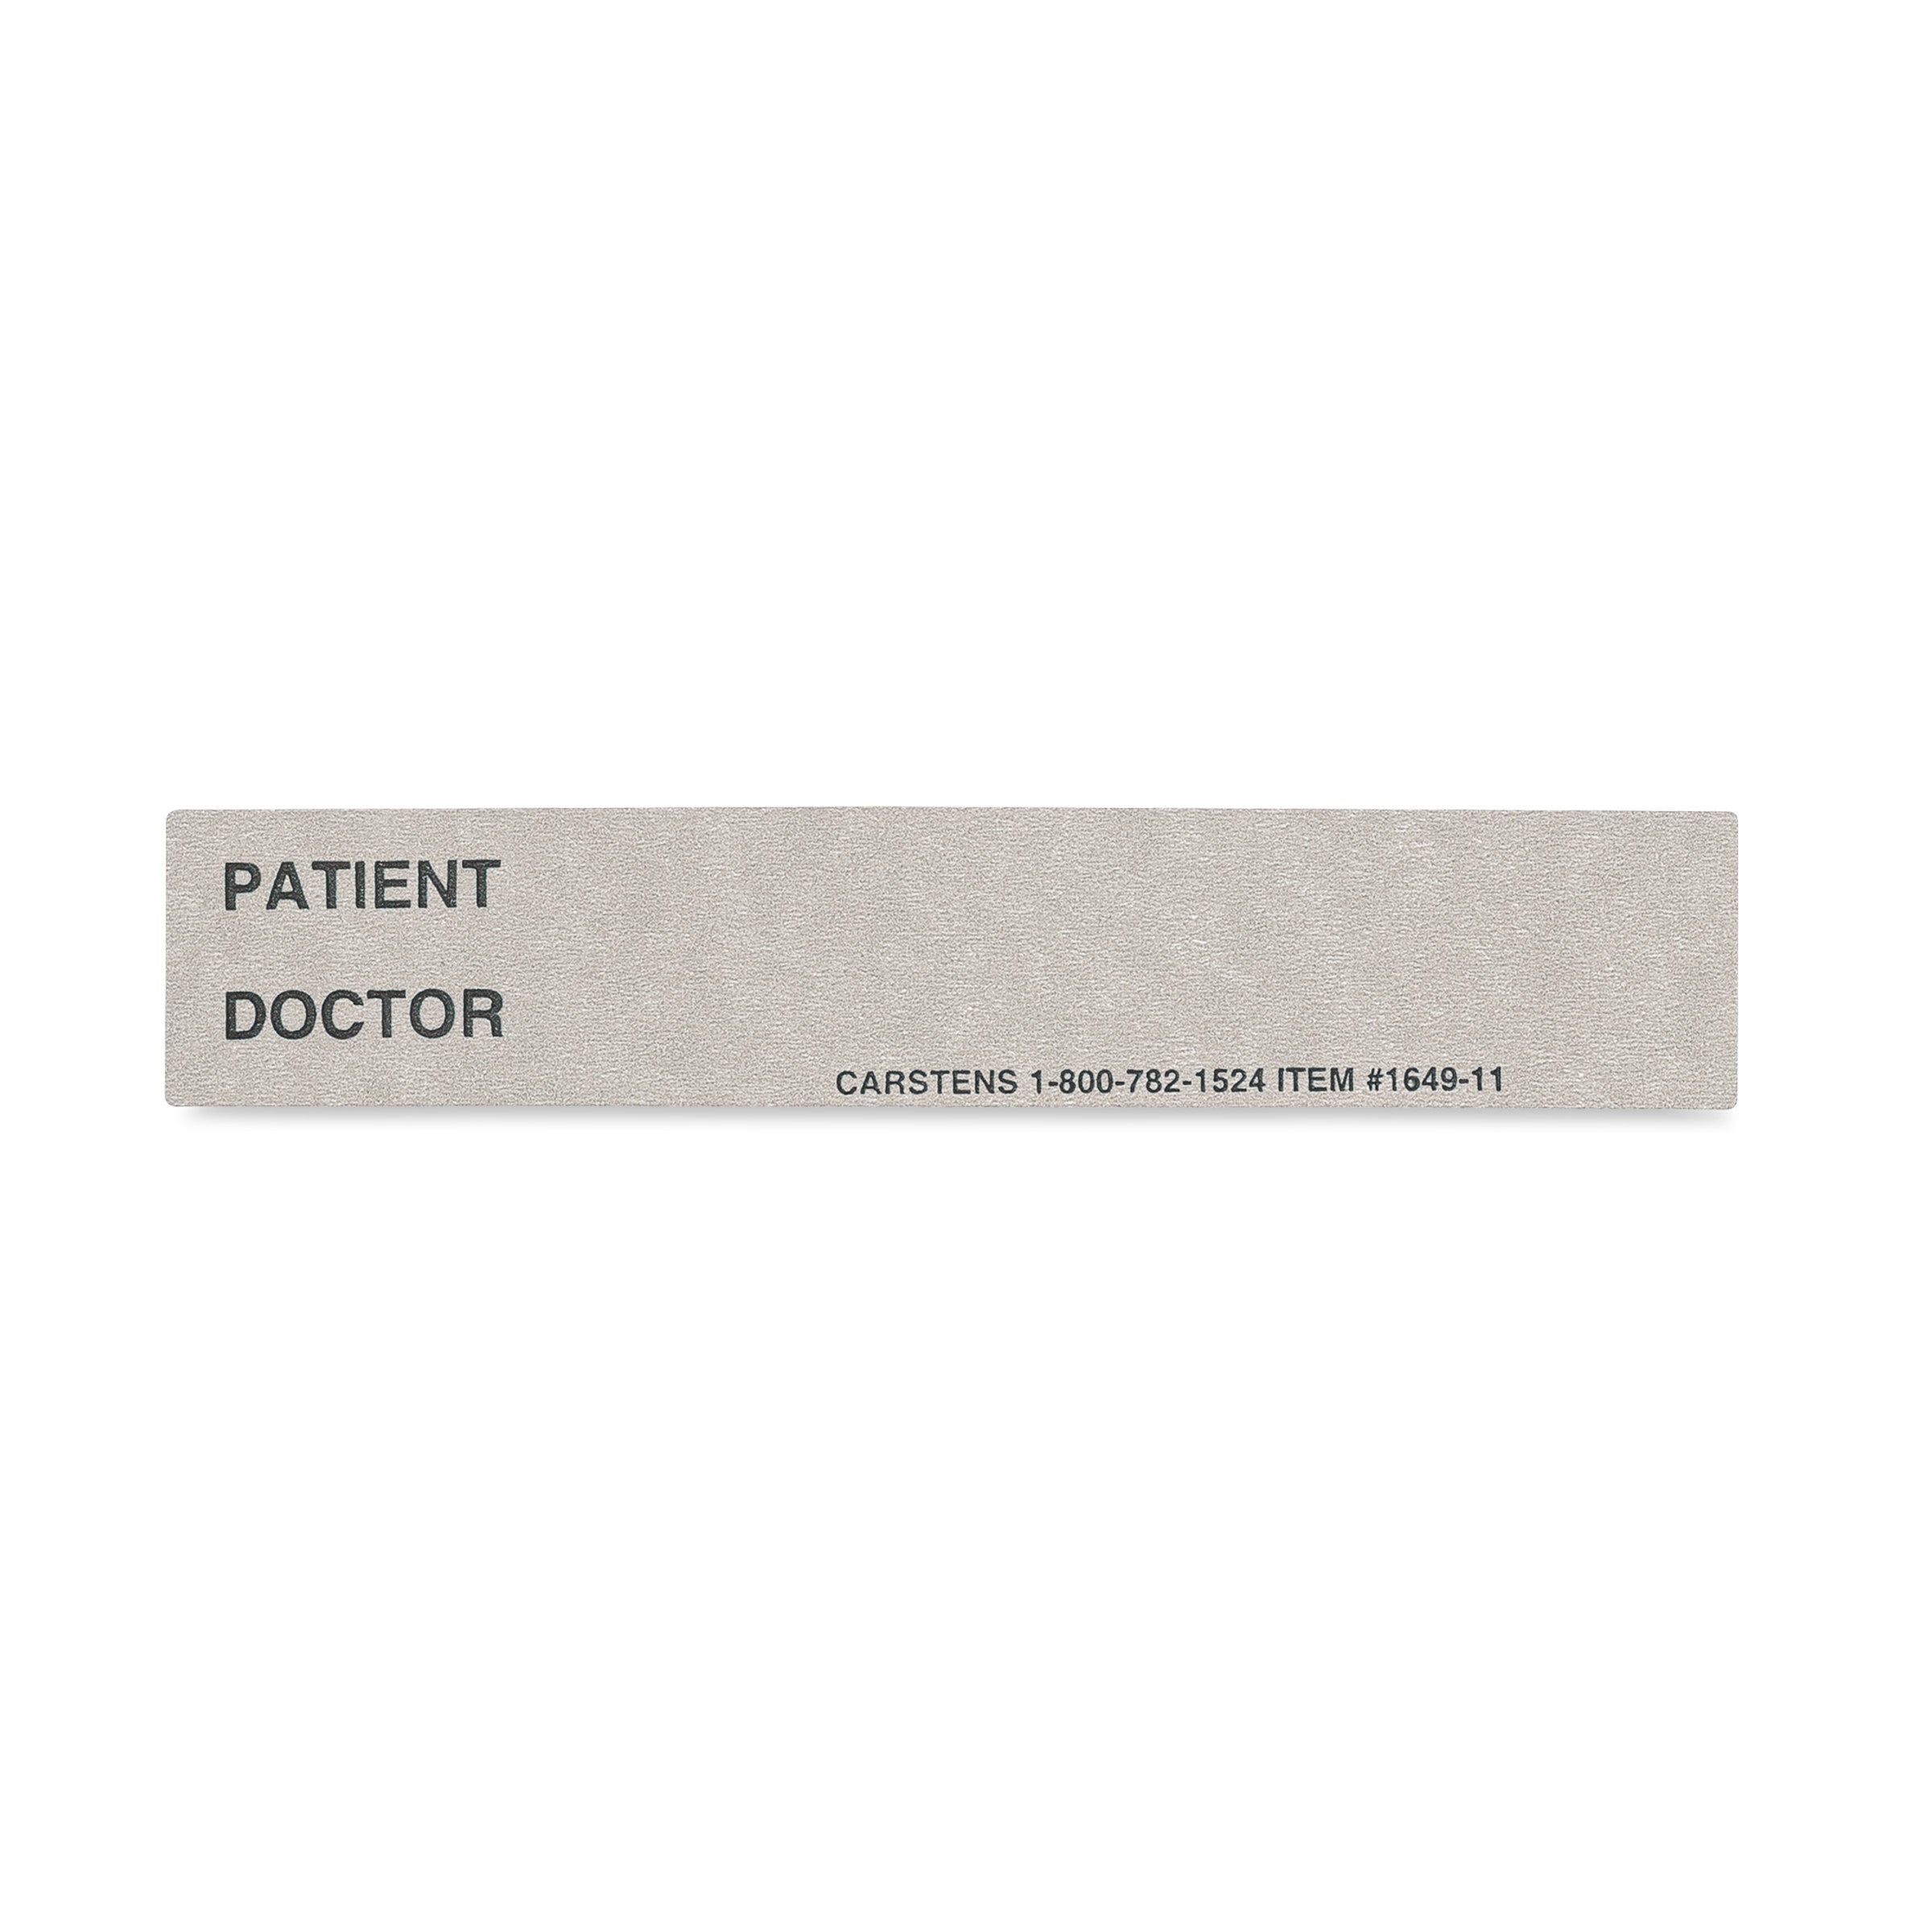 Patient / Doctor Preprinted ID Cards for 1.5 – 4” Ring Binder Spines - Pack of 100